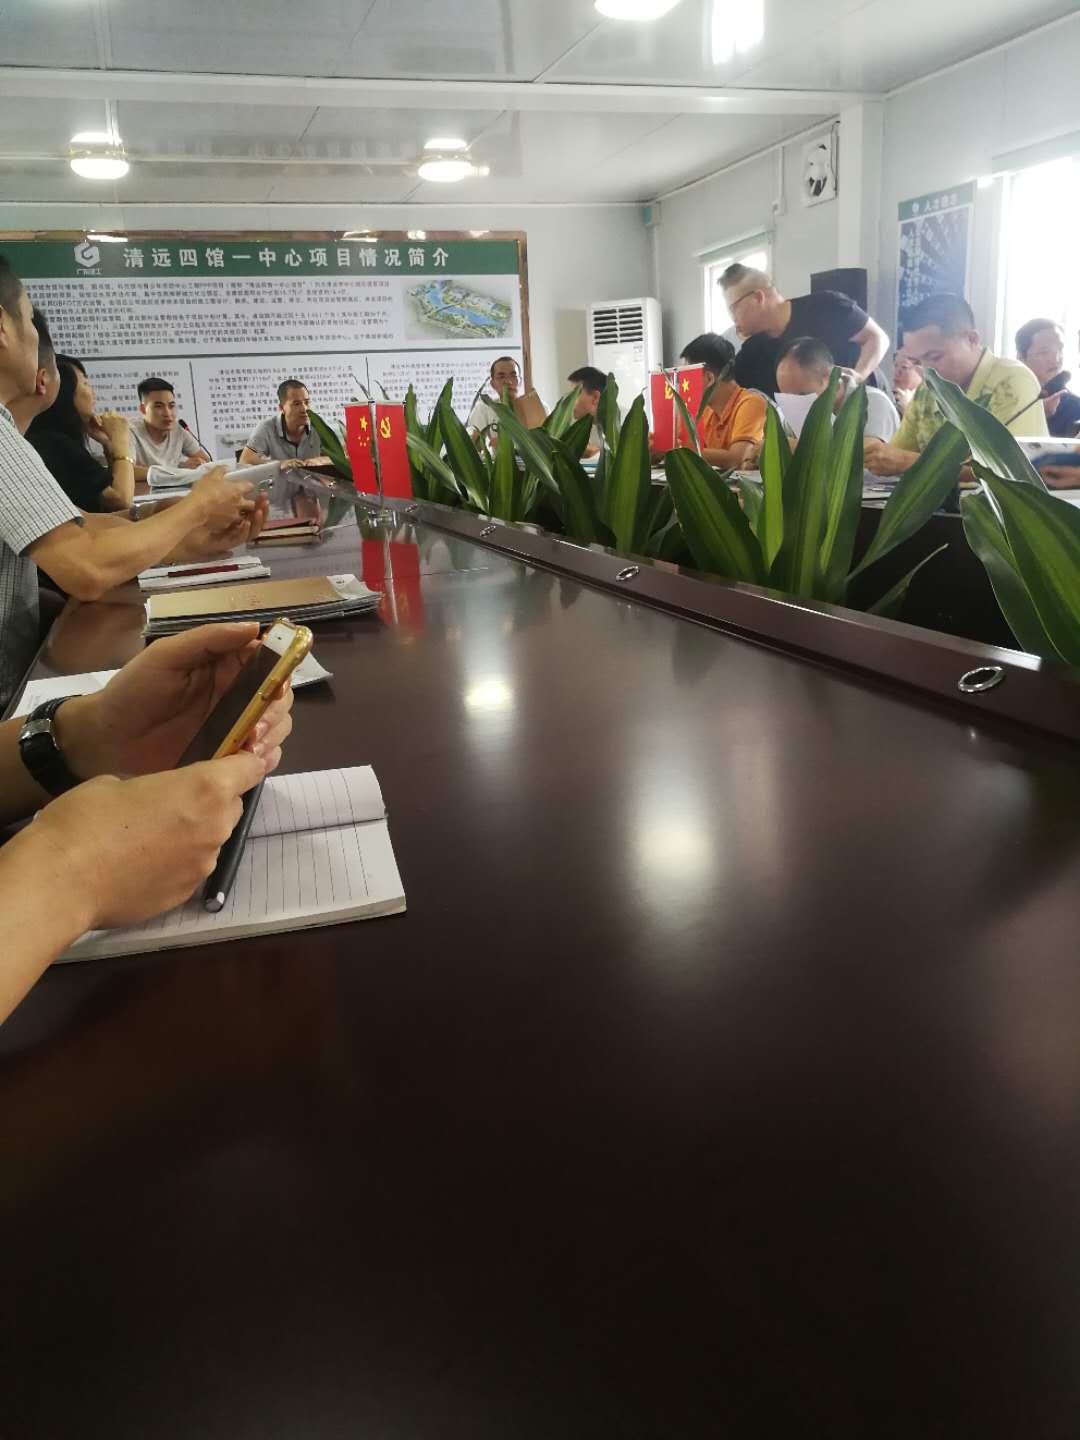 Woodedtech participated in the start-up work of the Qingyuan Library Project